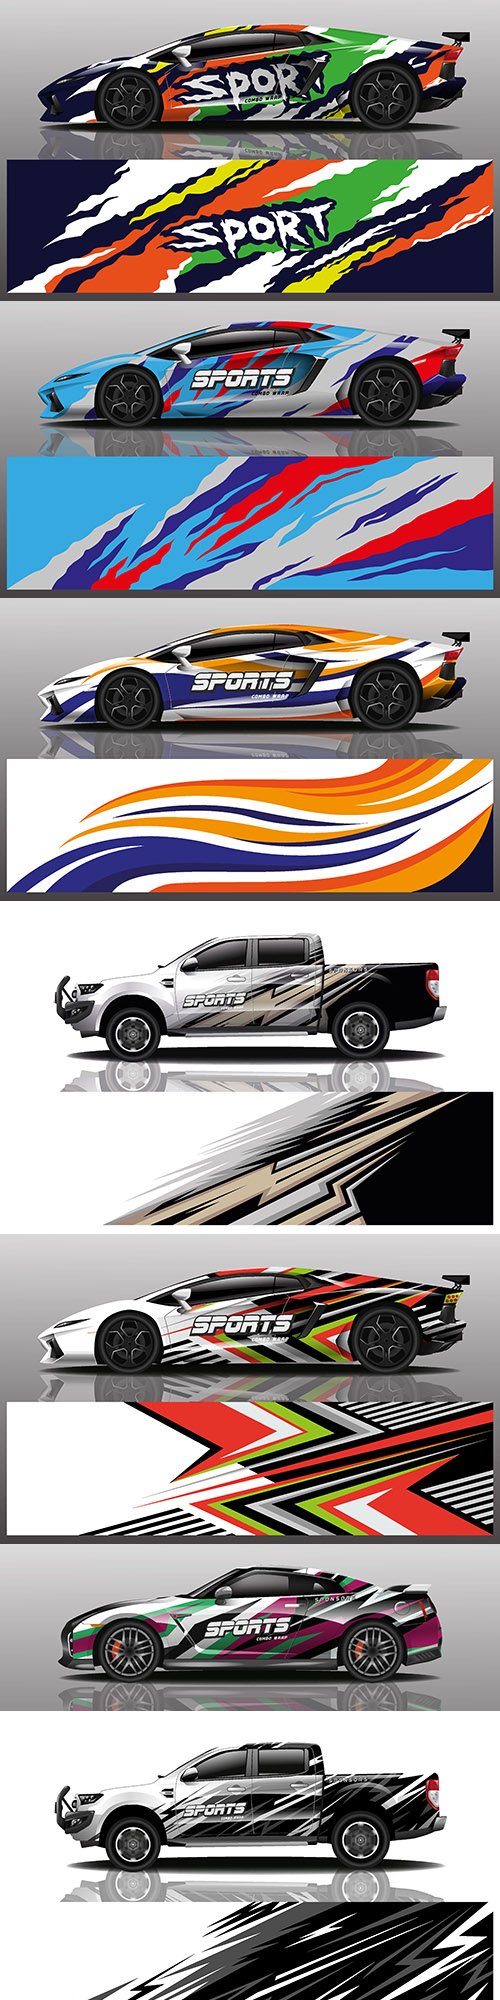 Truck and sports car colorful design sticker